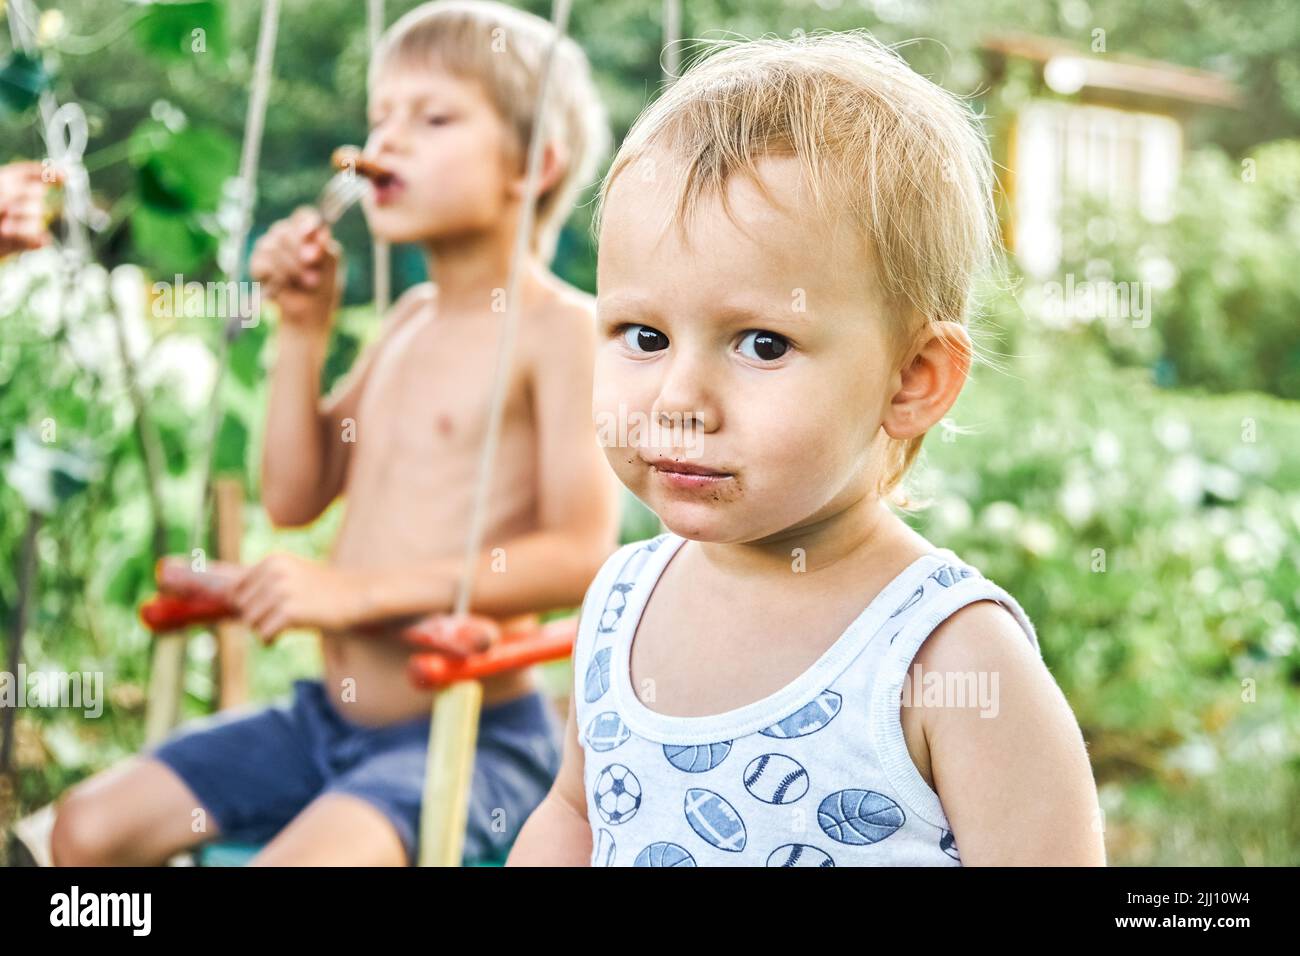 Brothers enjoy barbecue sausage at picnic on nature with lush greenery in countryside. Portrait of cute blond toddler boy on blurred background Stock Photo